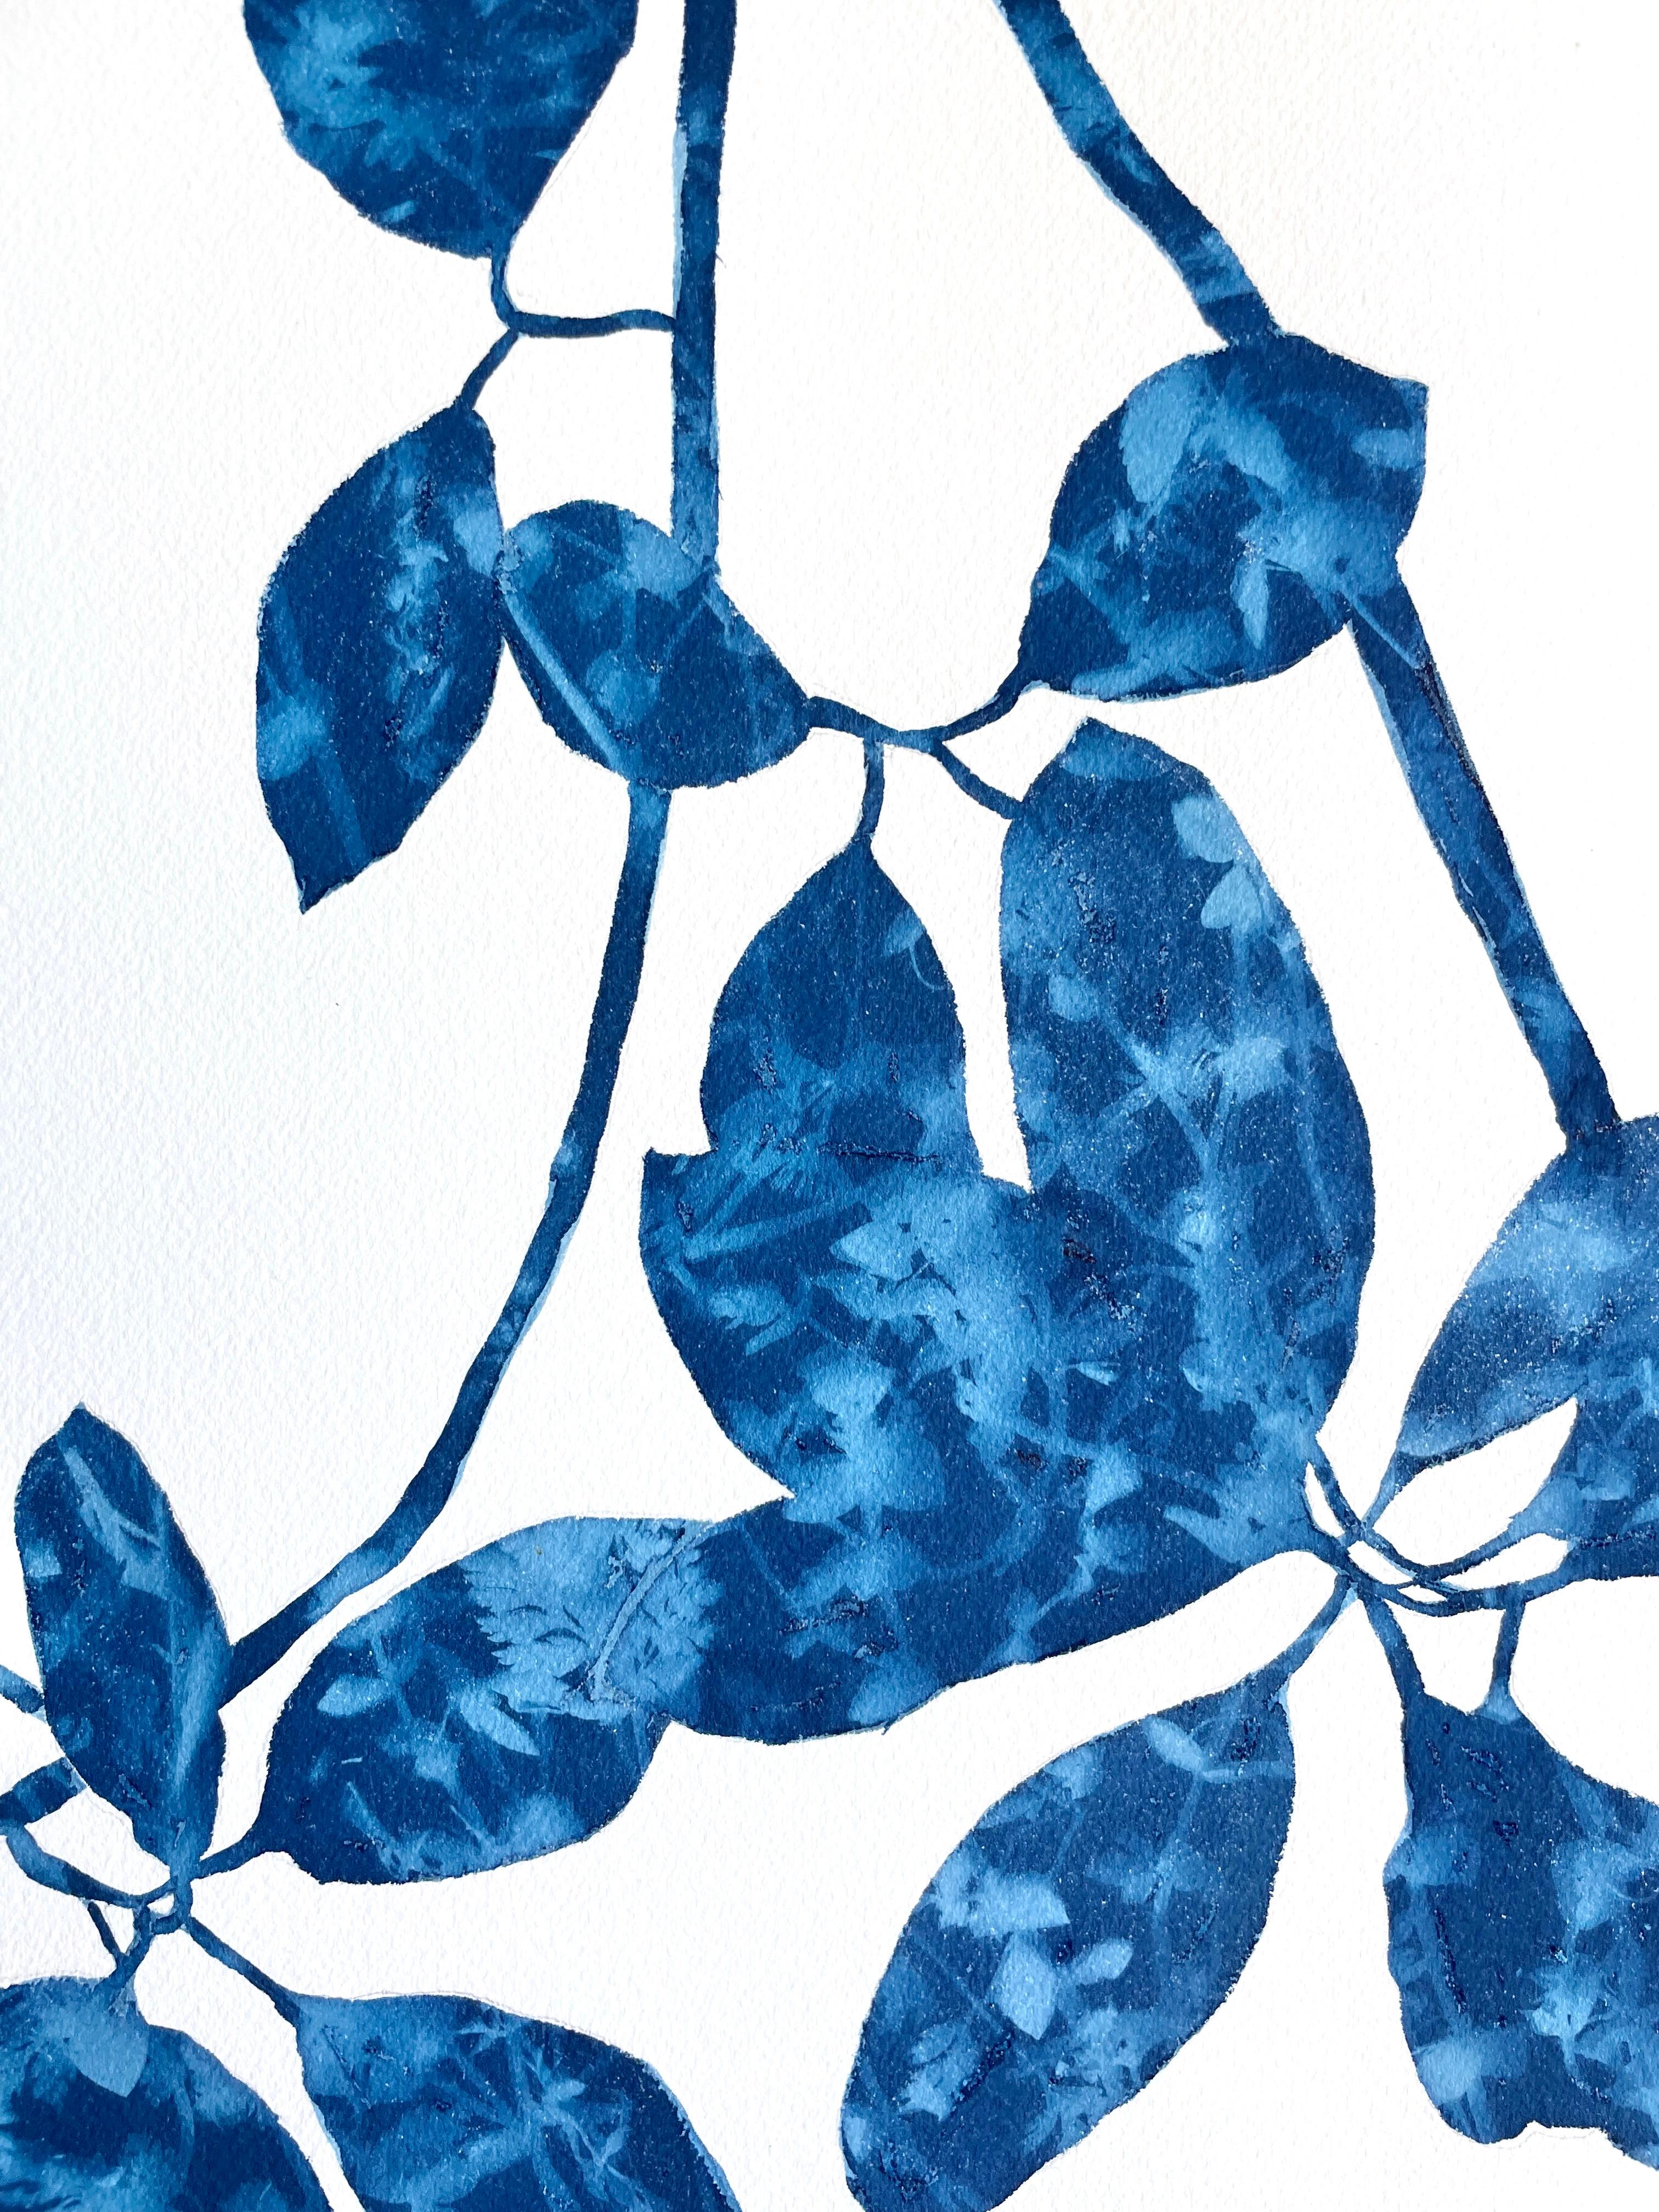 Delft Madrone II  (40 x 26 inch cyanotype painting) - Print by Christine So